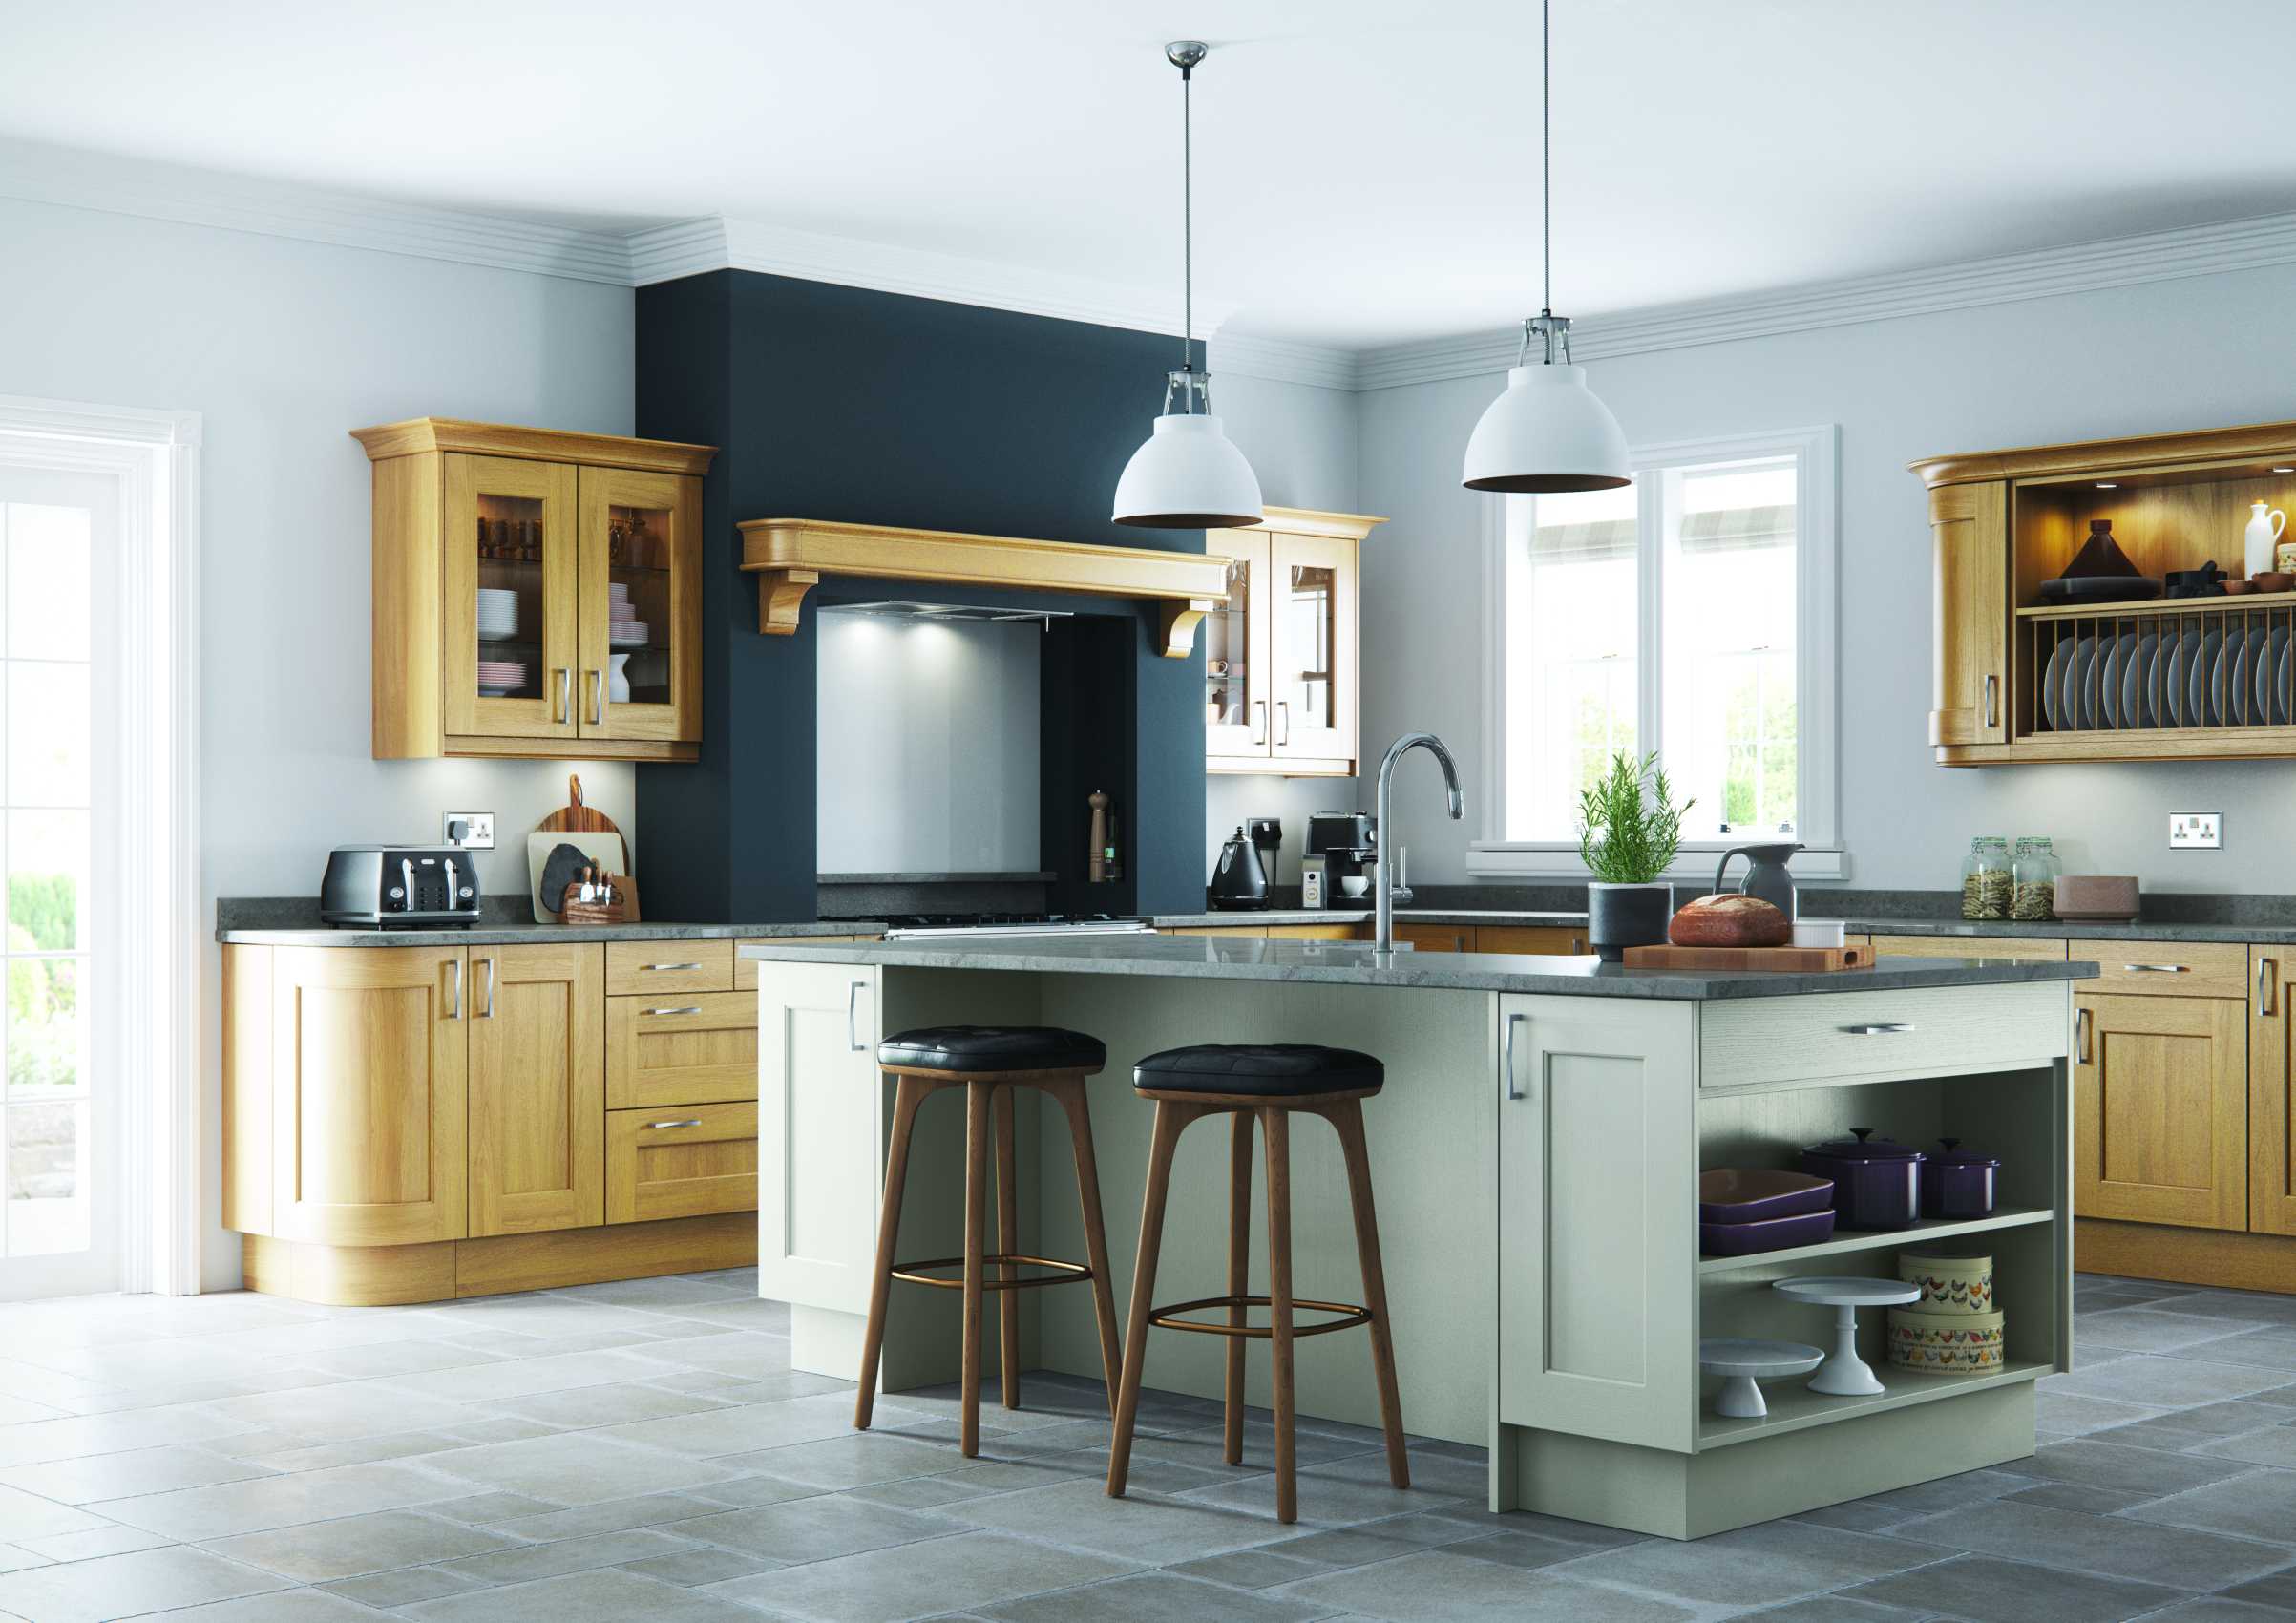 Light oak and stone painted contemporary shaker kitchen full view